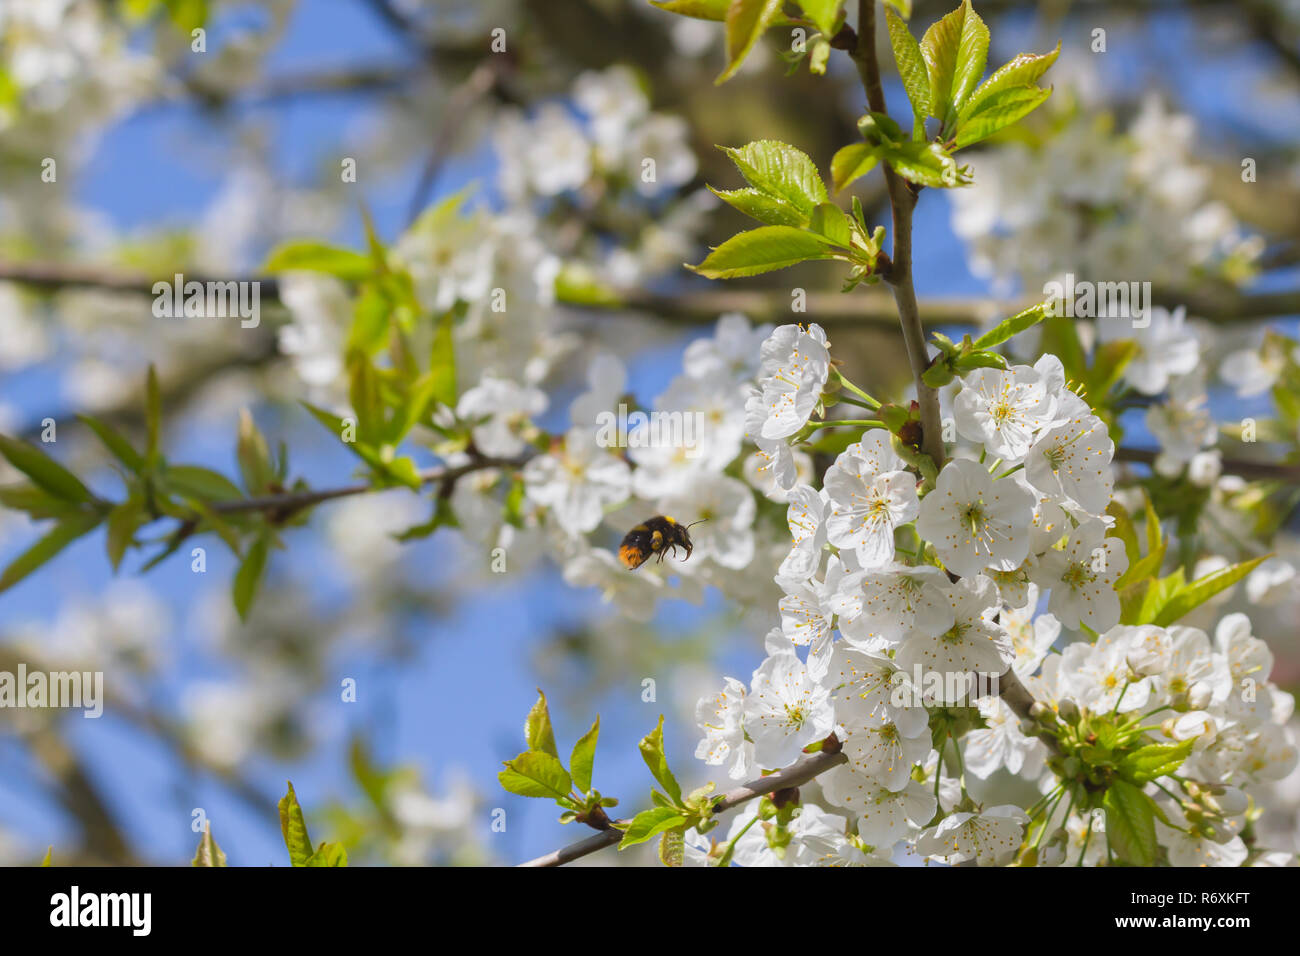 Bumblebee and cherry blossoms Stock Photo